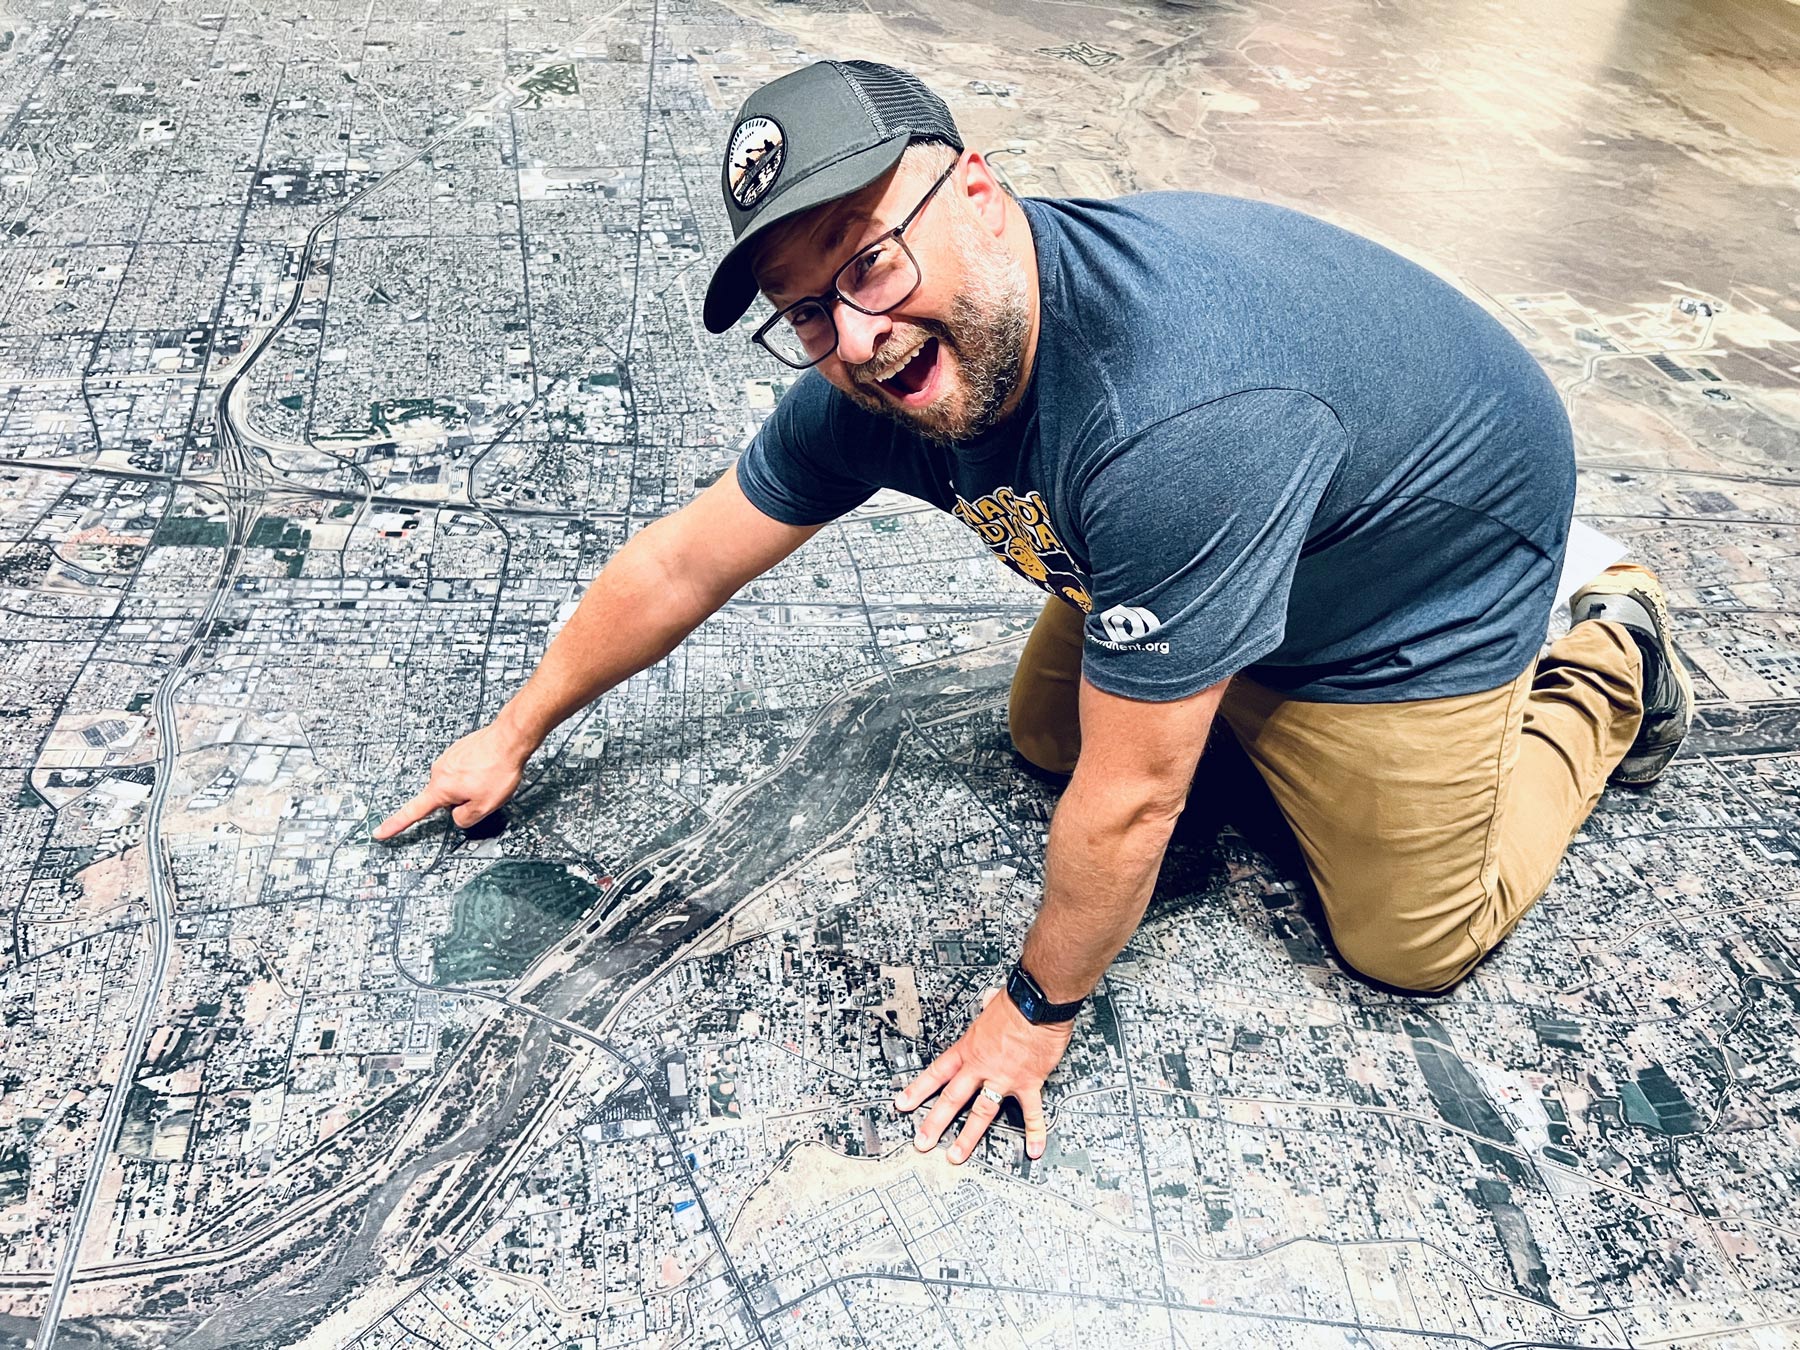 Robert points at a floor map